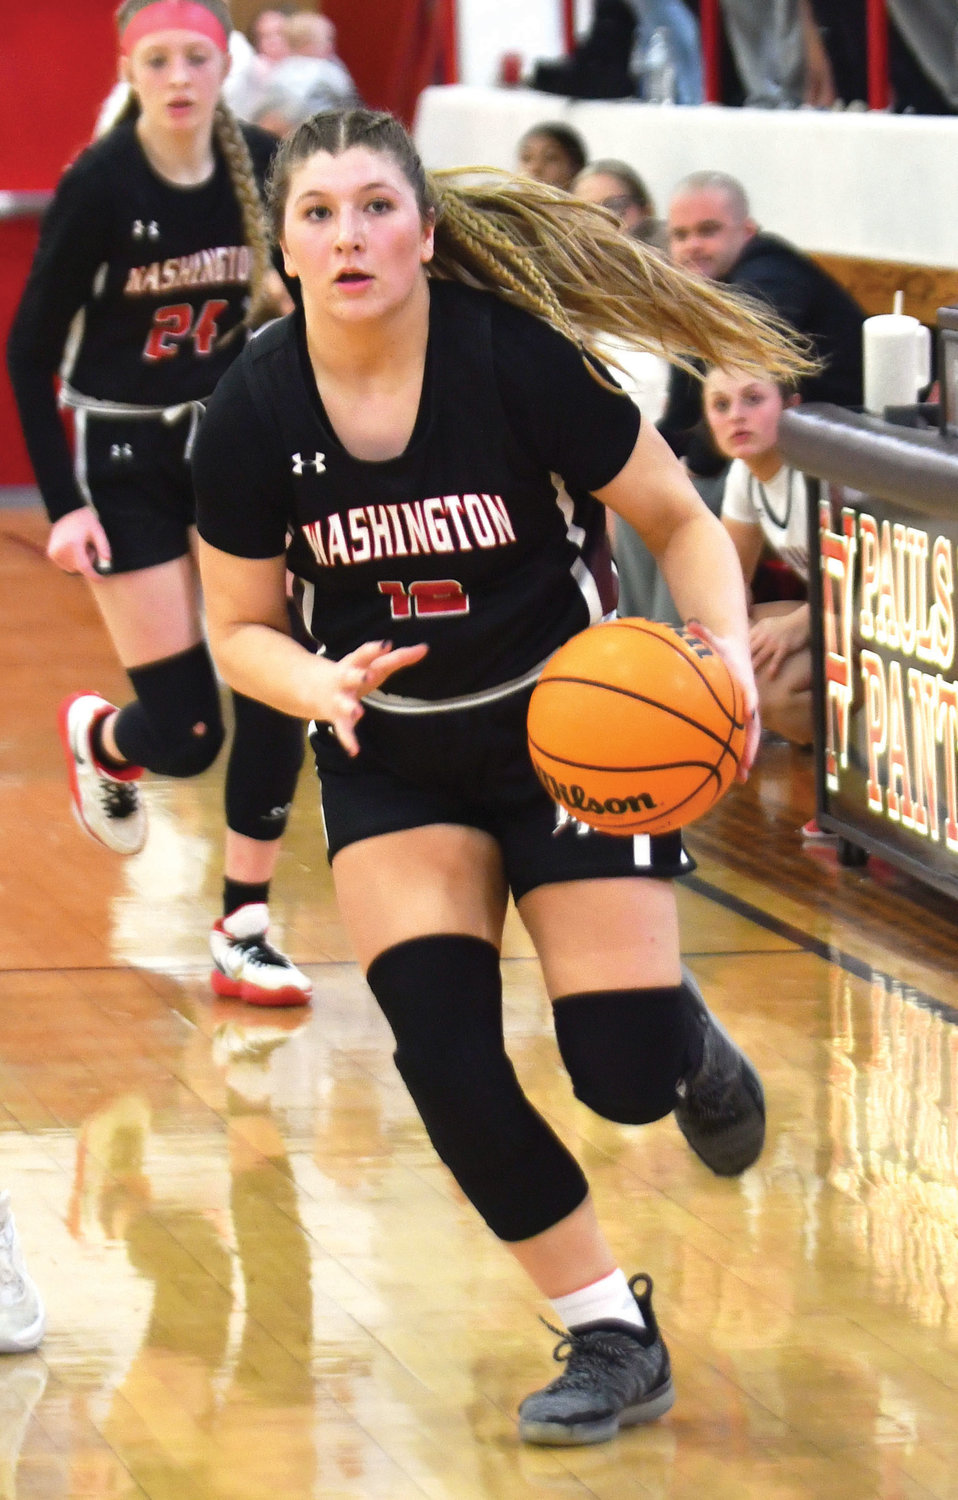 Washington senior Kyndall Wells handles the ball in the open court during the Warriors’ 55-34 win over Pauls Valley. Wells scored eight points in the game.